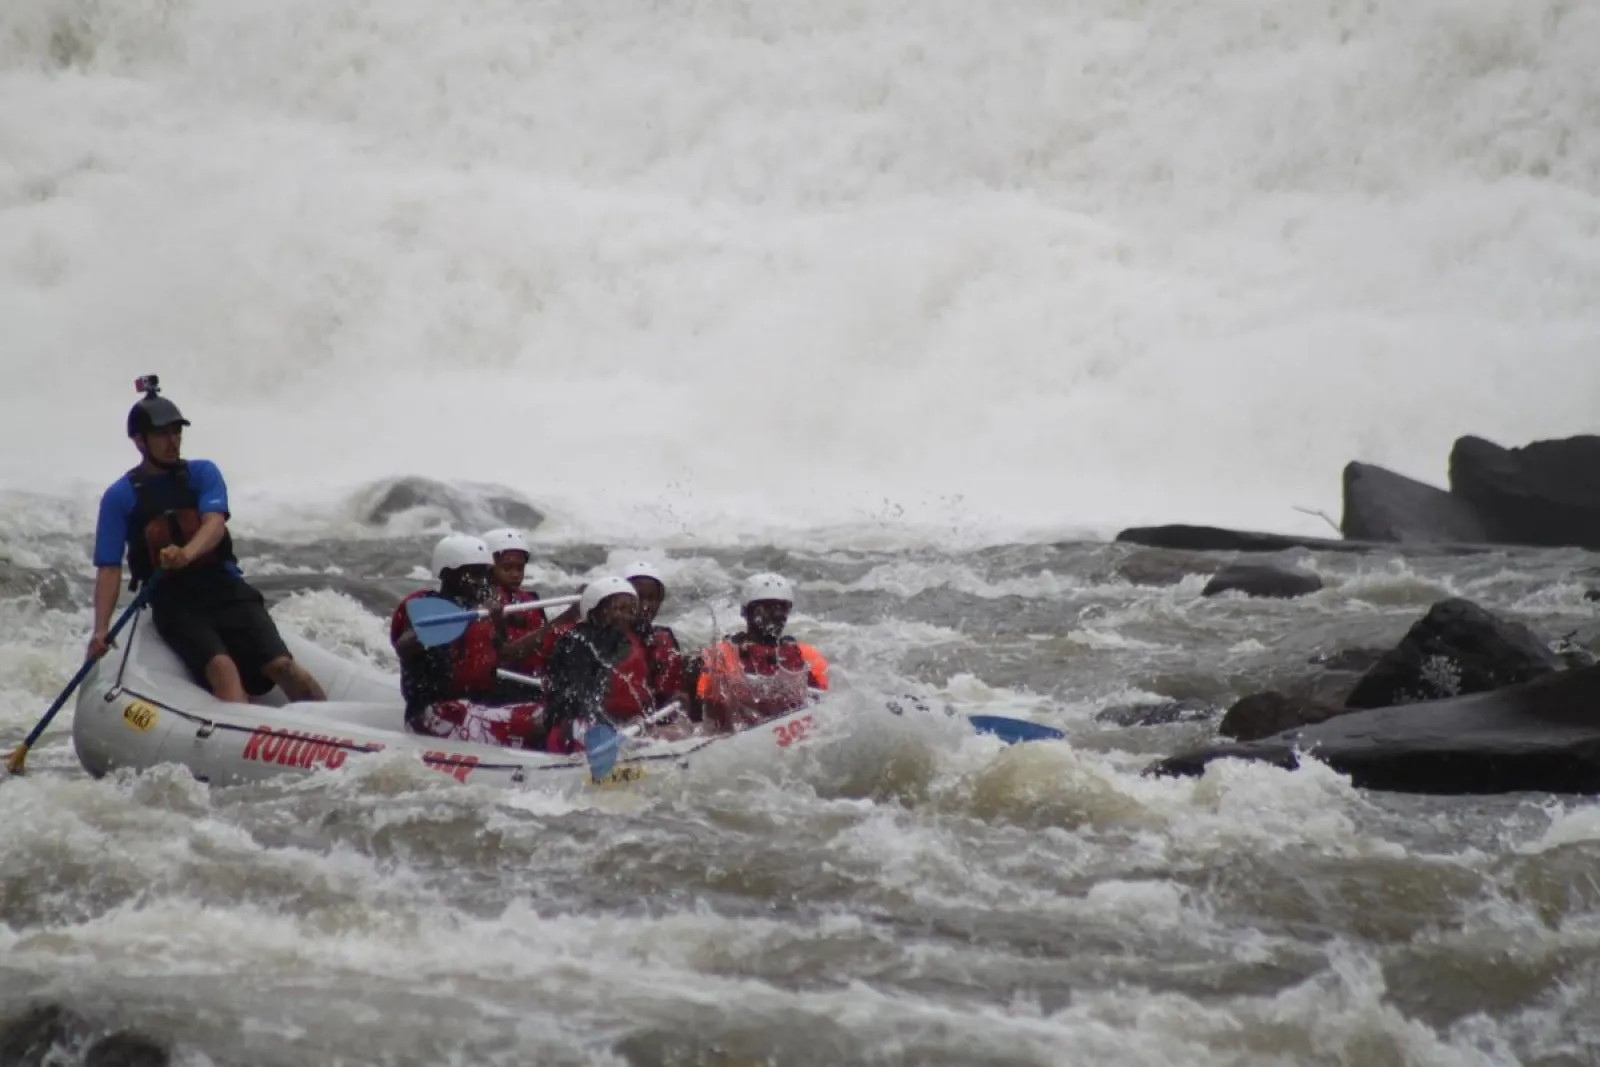 a group riding on the rapids